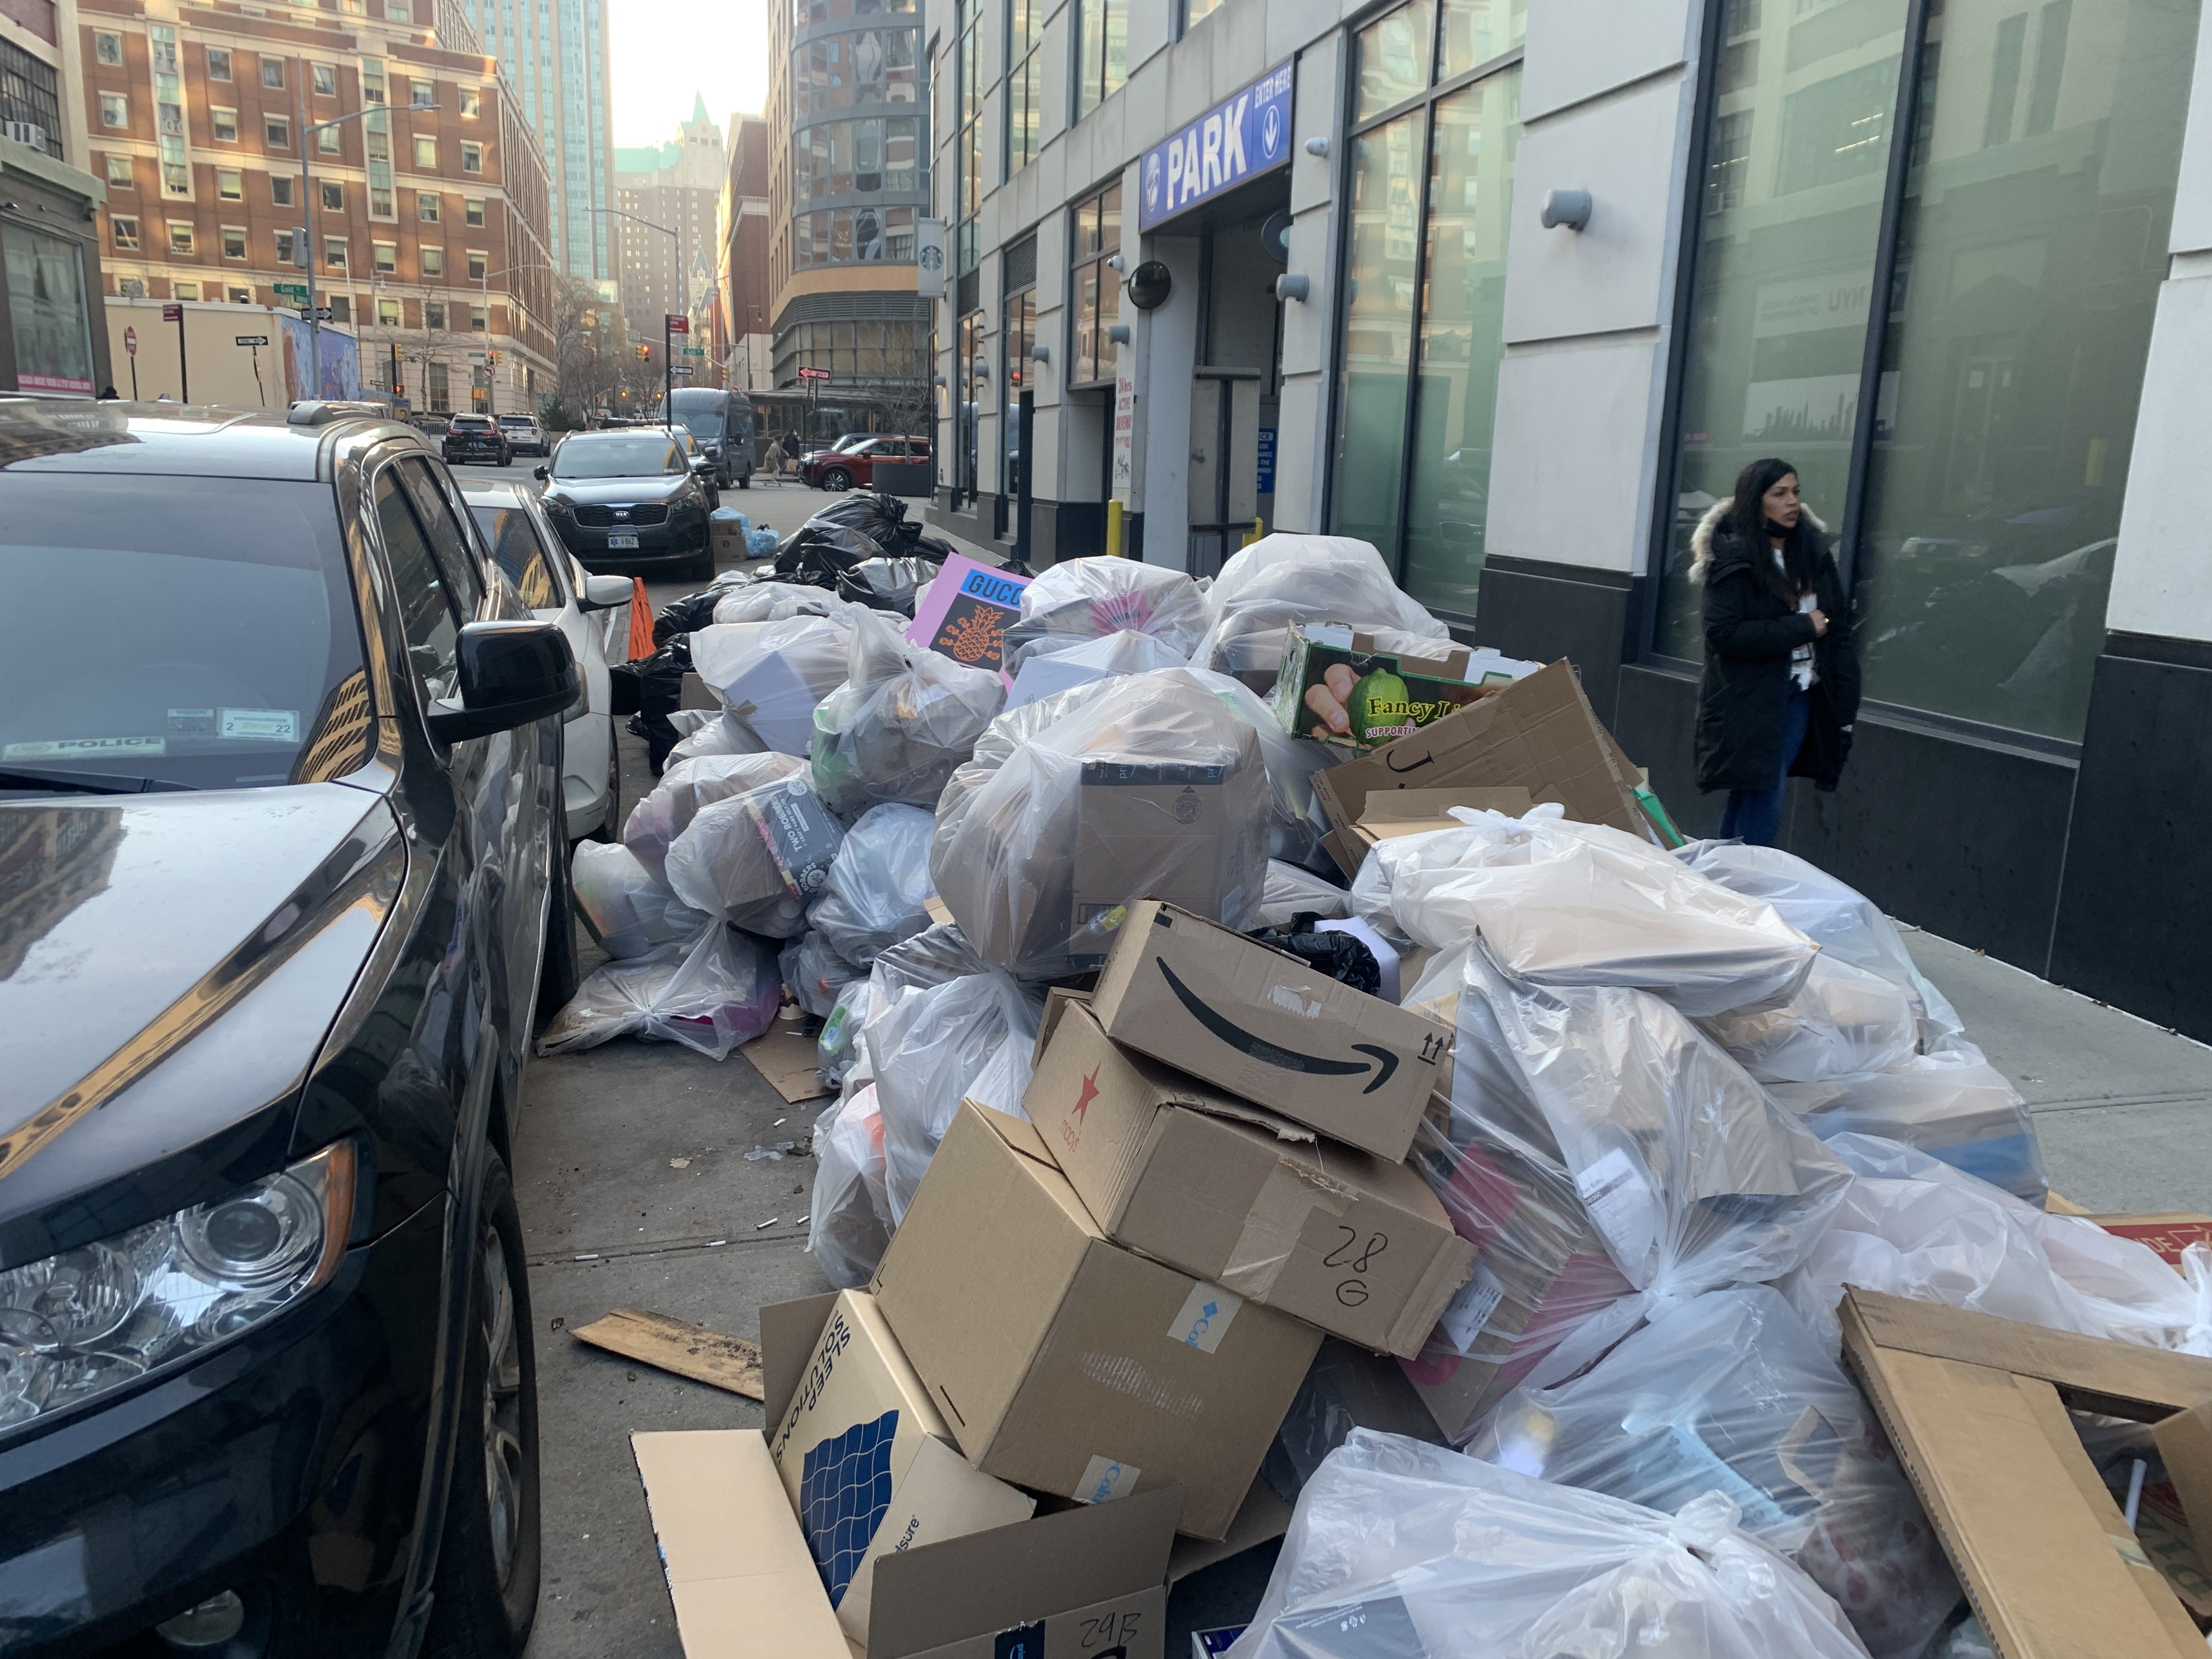 https://lede-admin.nyc.streetsblog.org/wp-content/uploads/sites/48/2022/03/garbage-bags-with-pedestrian1a-1-rotated.jpg